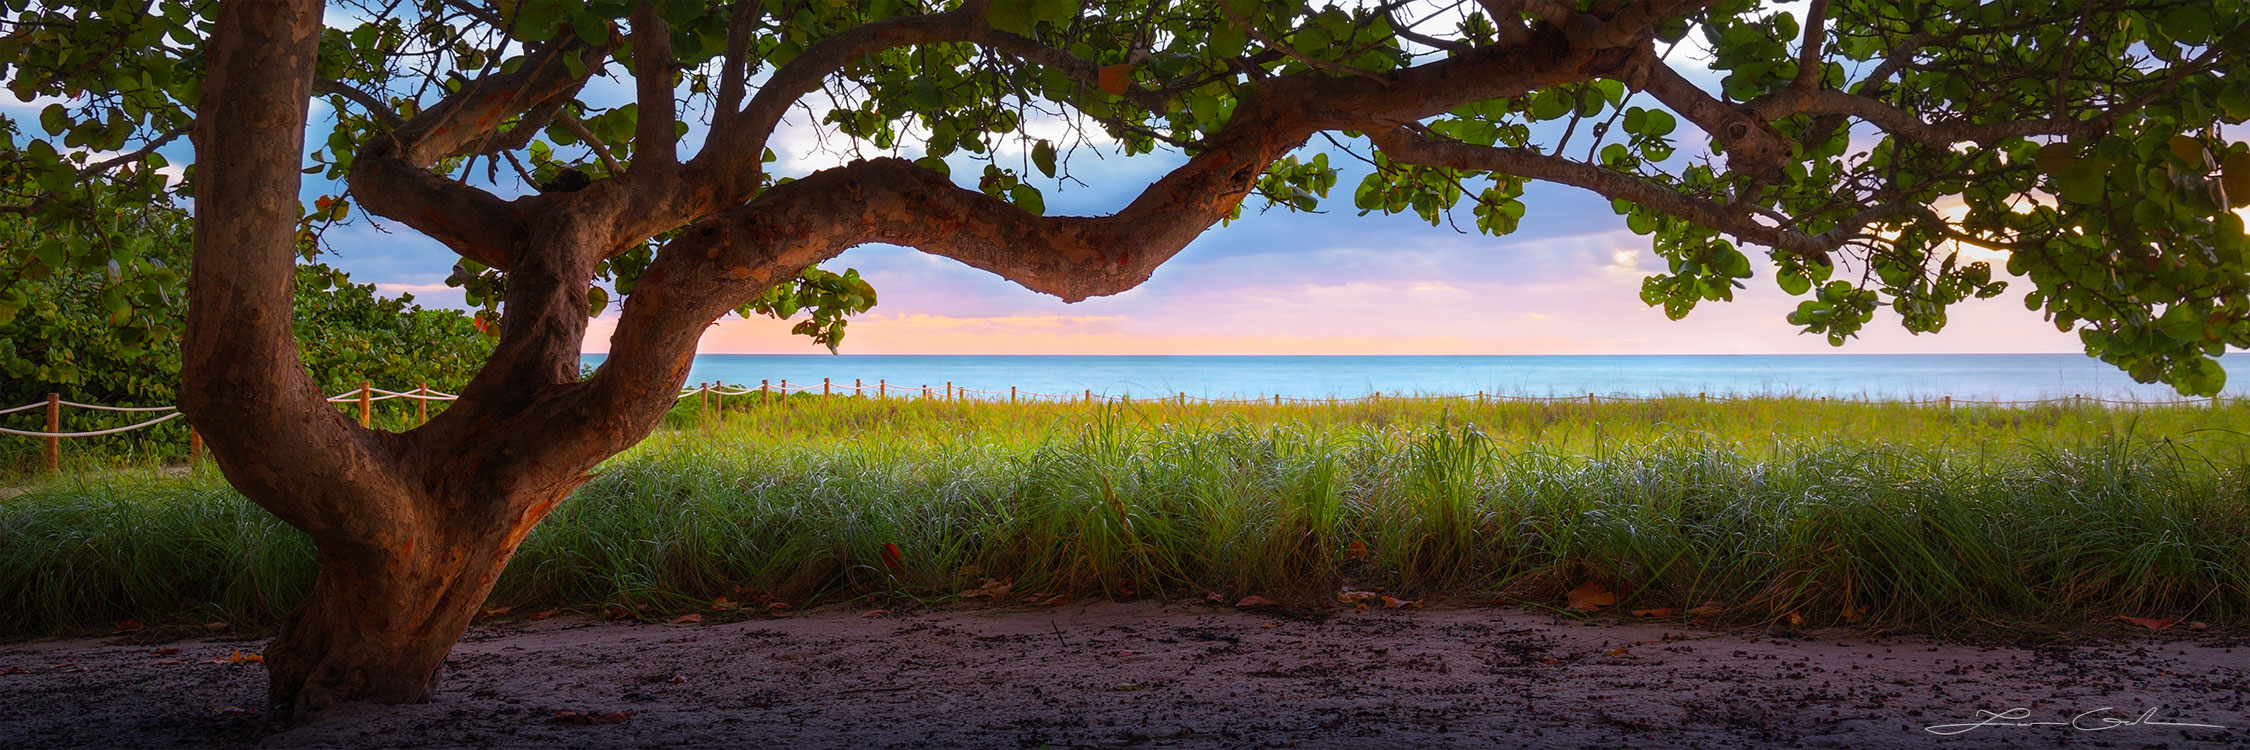 A beautiful tropical tree, beach sand, and grass create a natural window frame into the amazing view of the ocean - Gintchin Fine Art